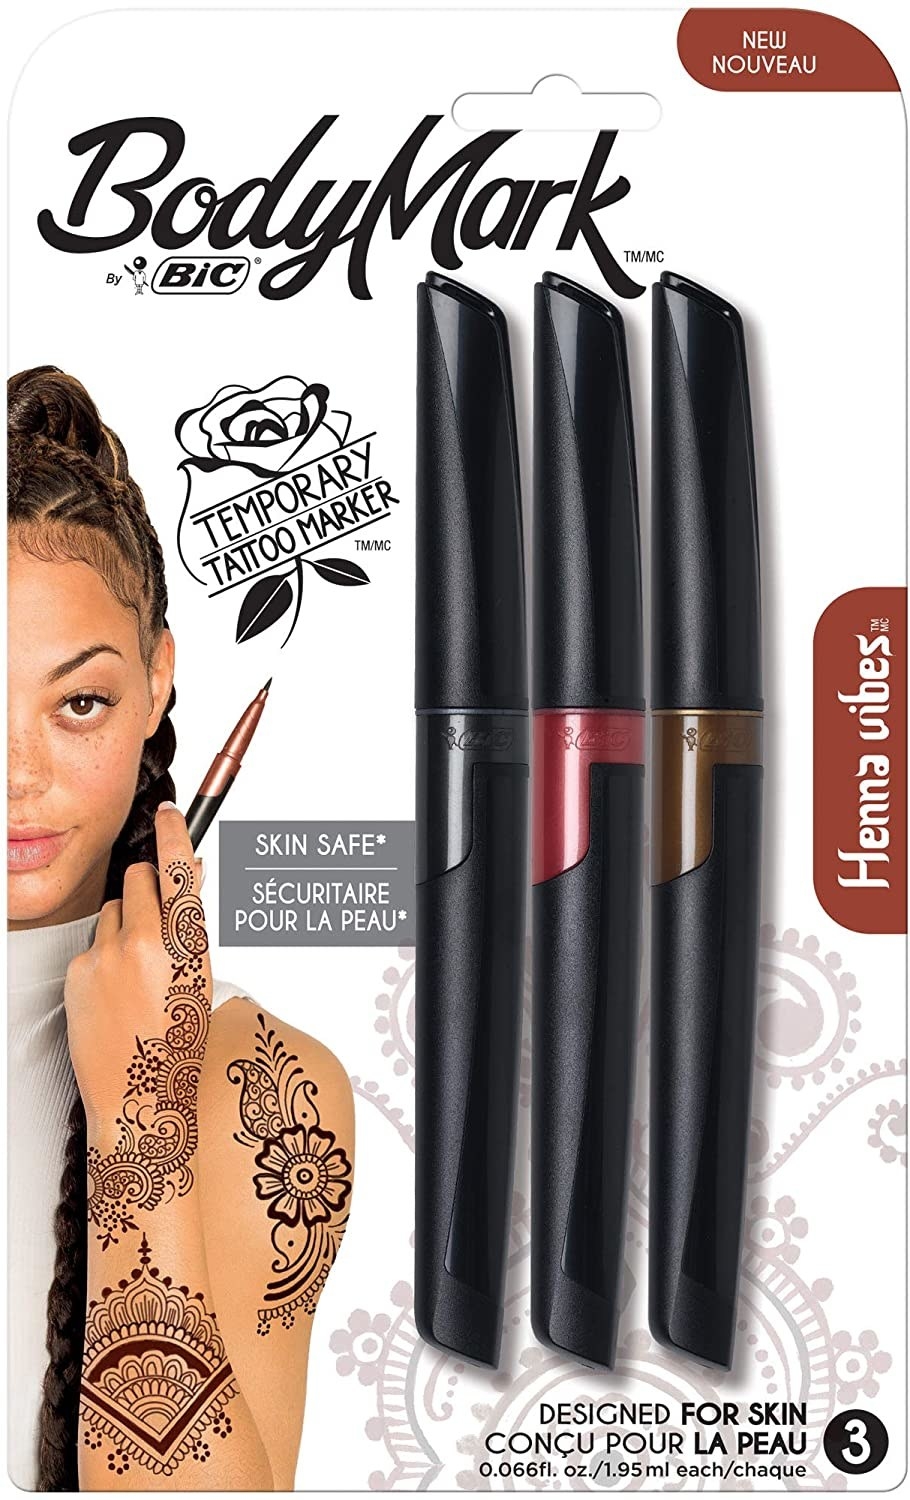 A package with three markers with a person in it that has henna designs